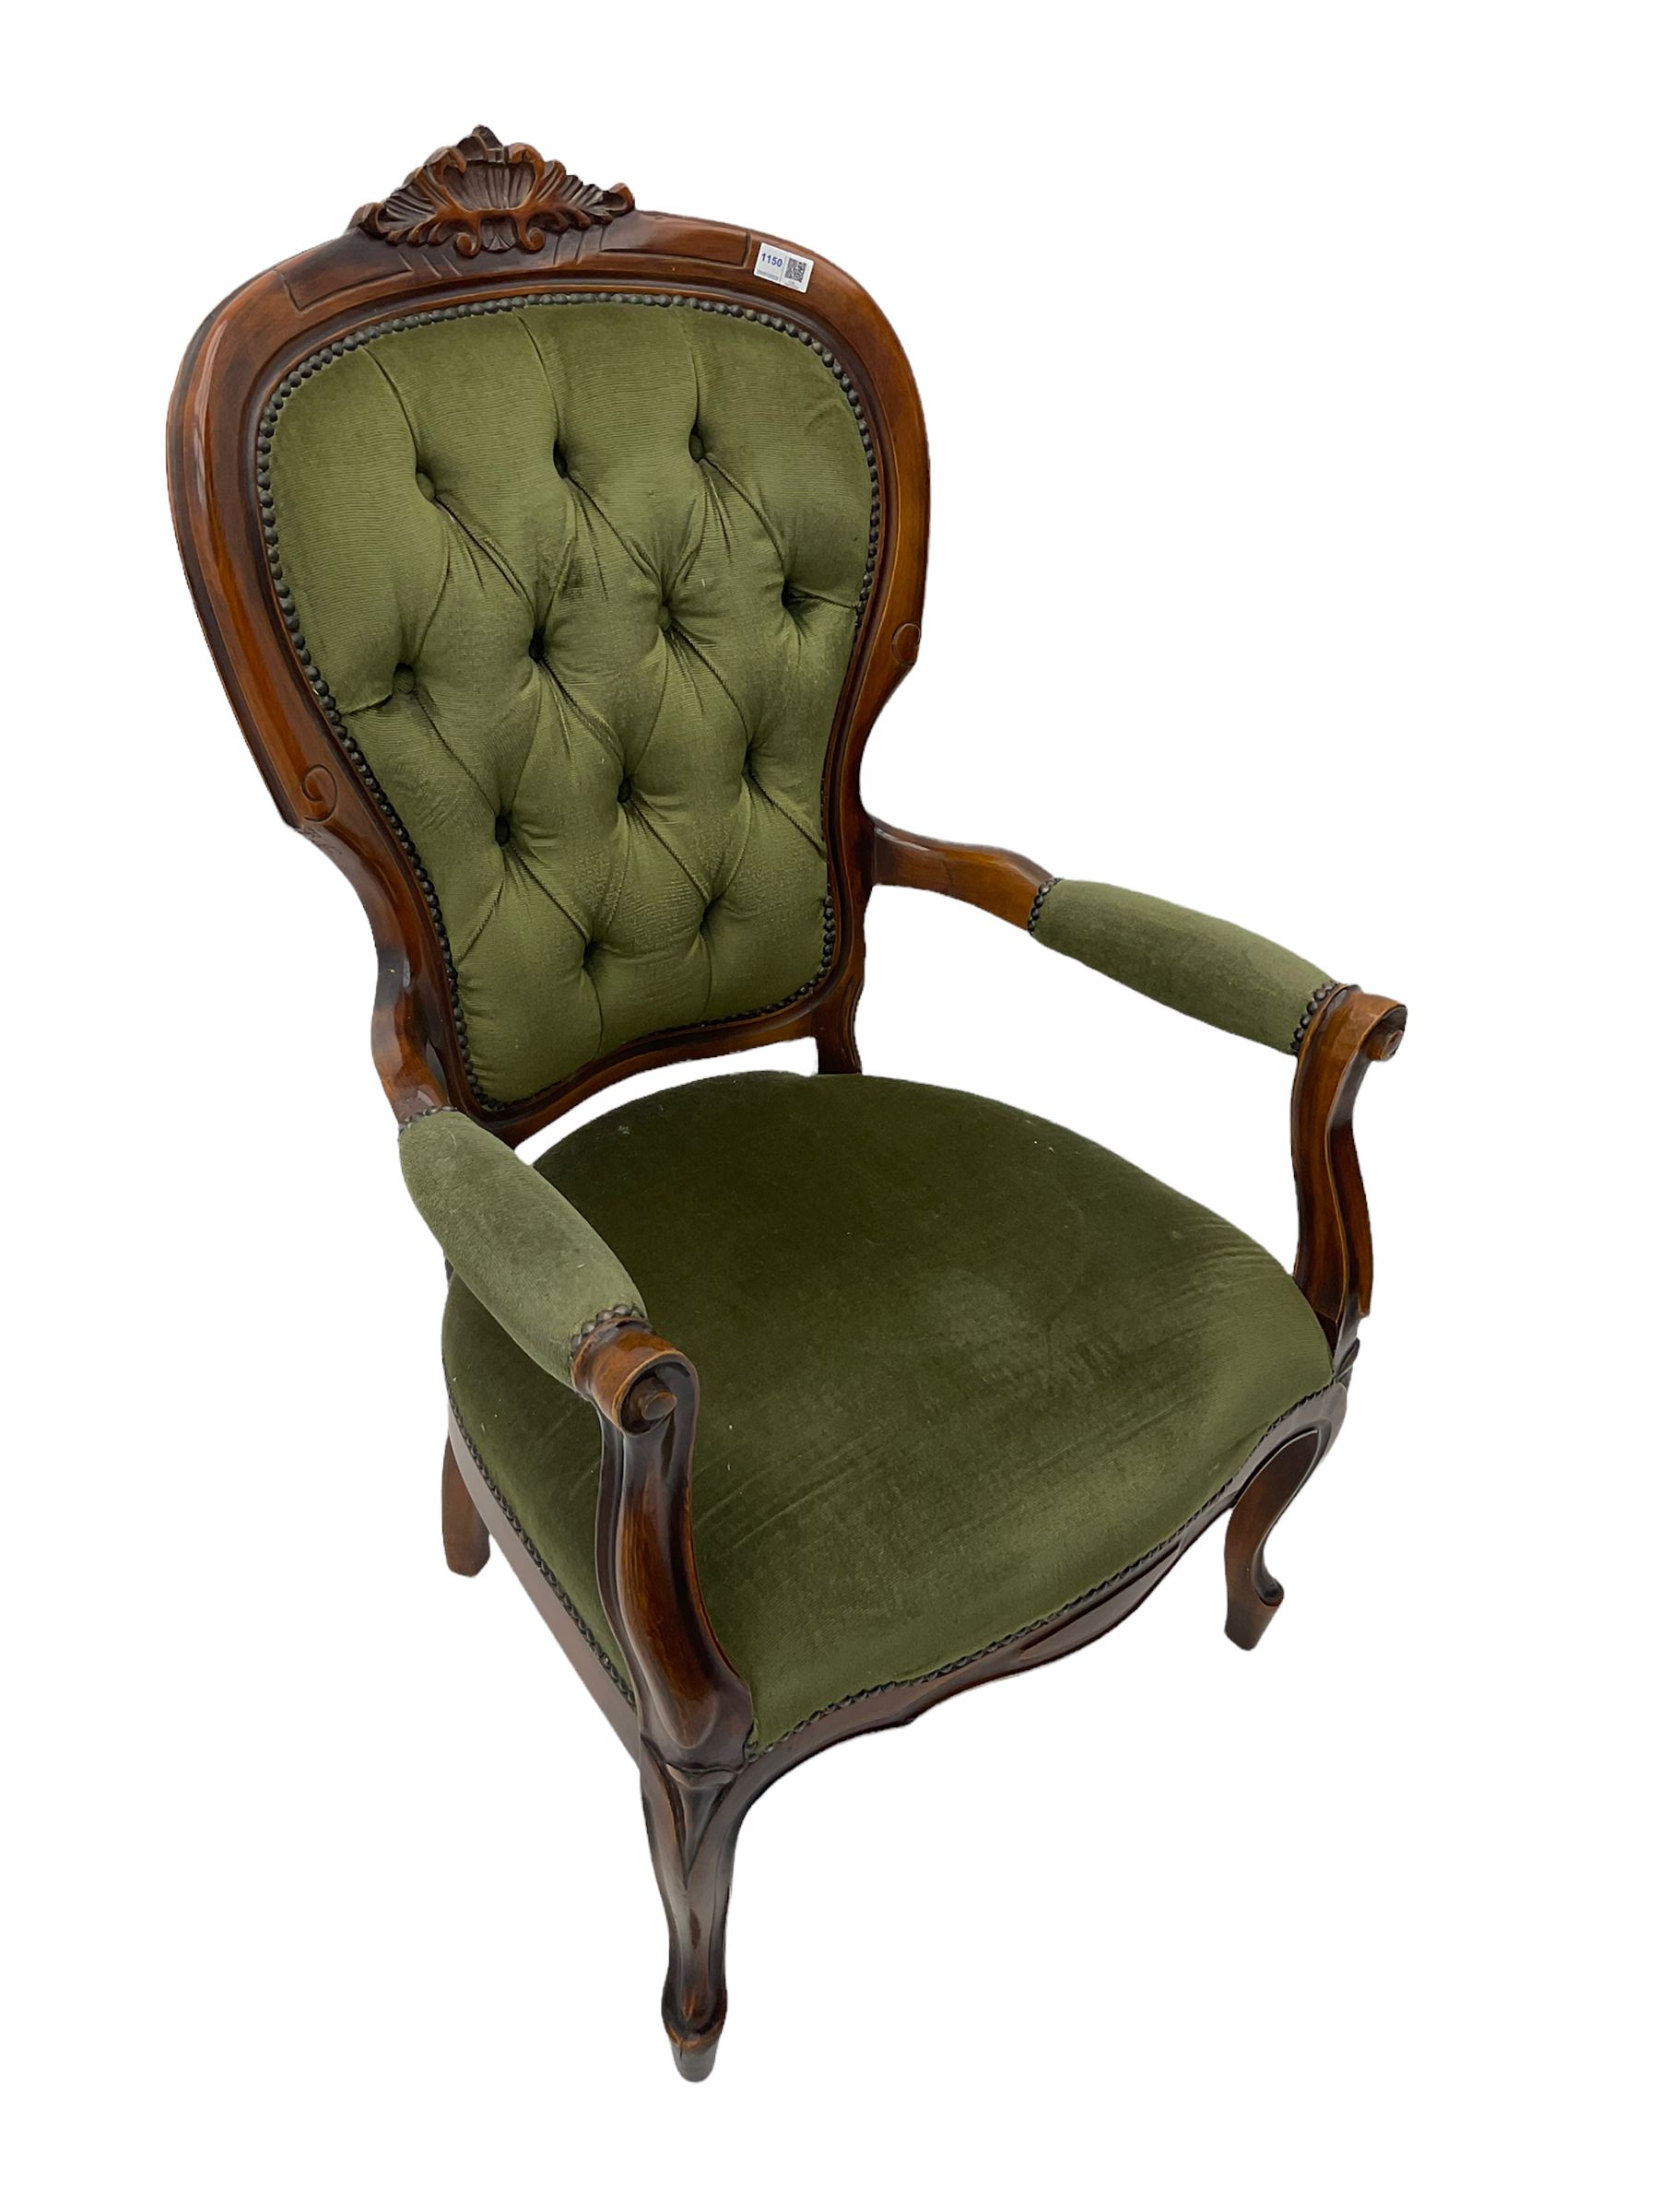 Victorian style stained beech armchair - Image 6 of 6